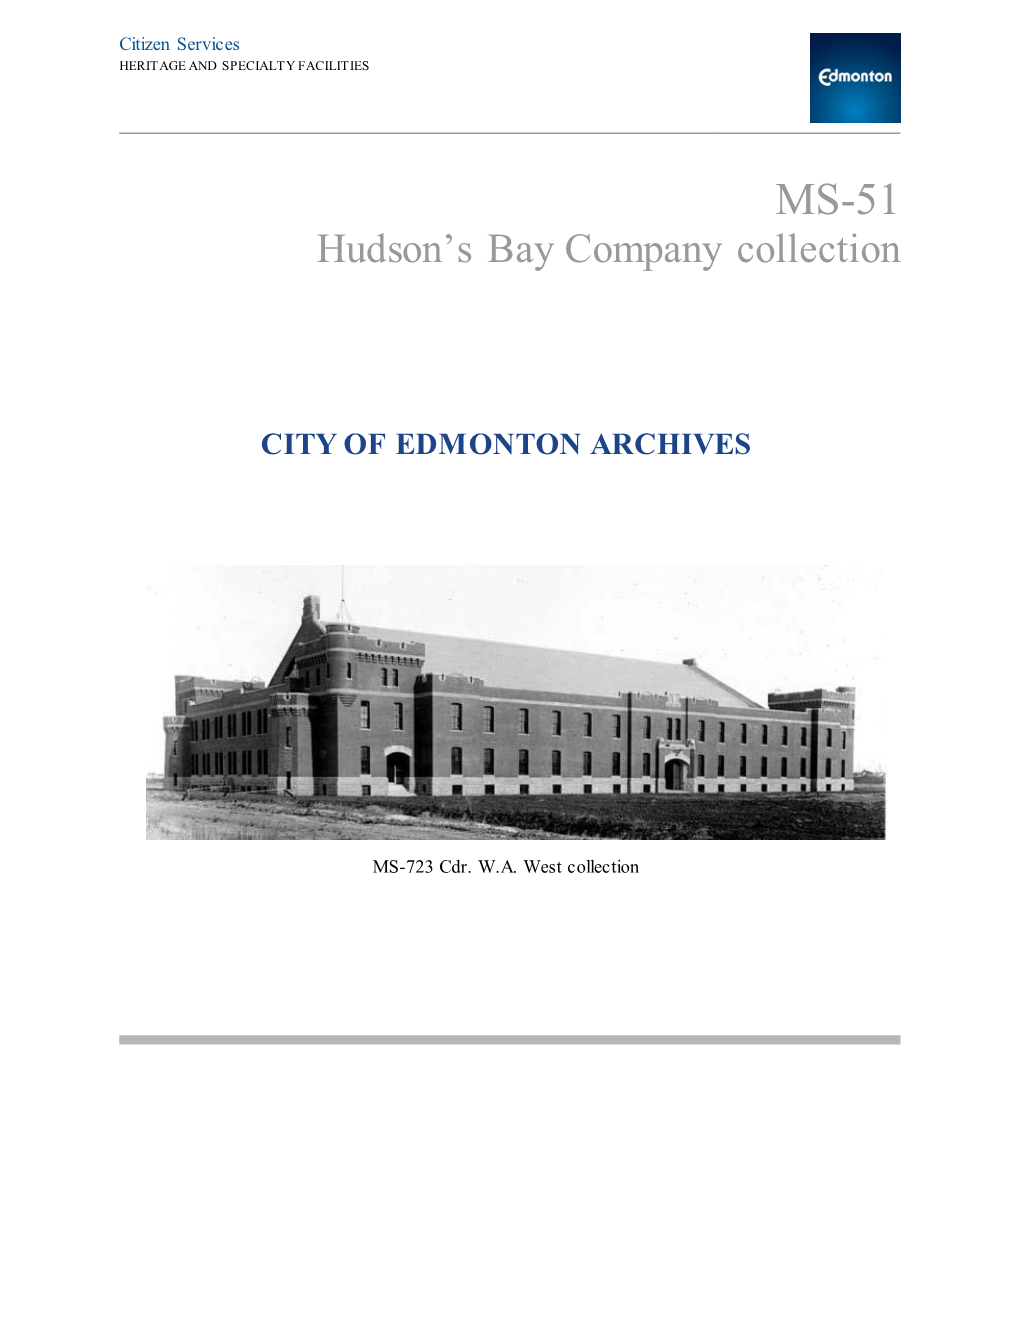 Hudson's Bay Company Collection